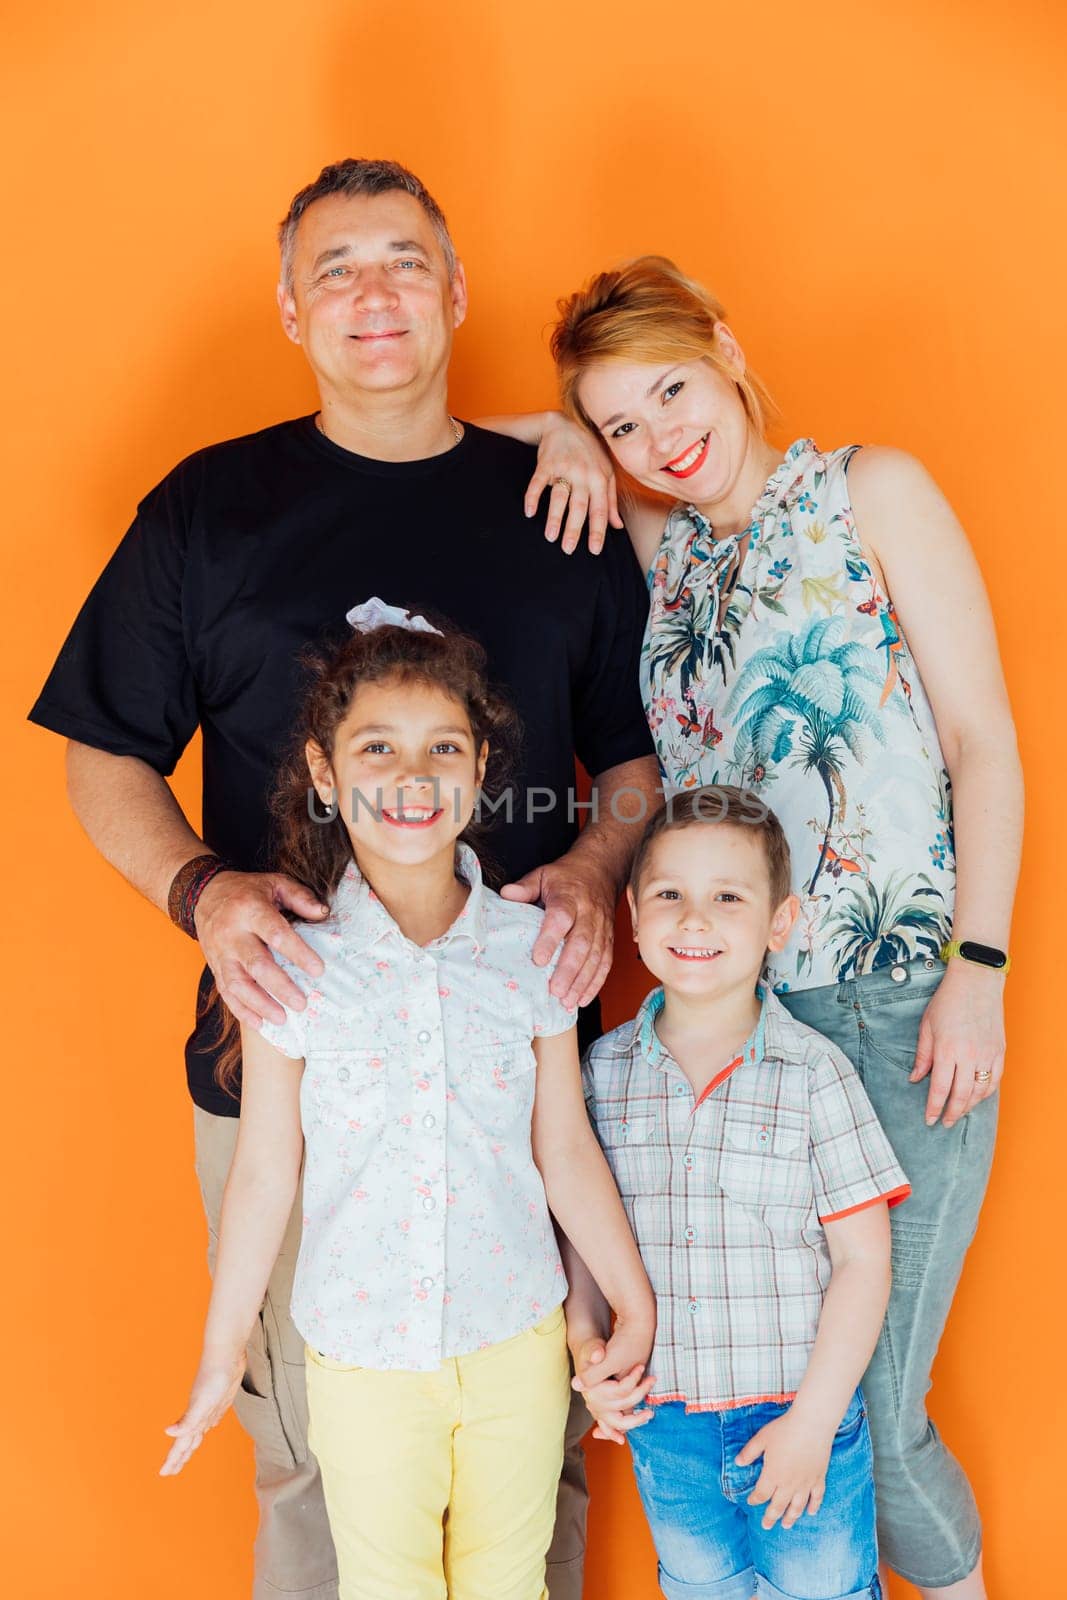 photo of mom with dad and son with daughter